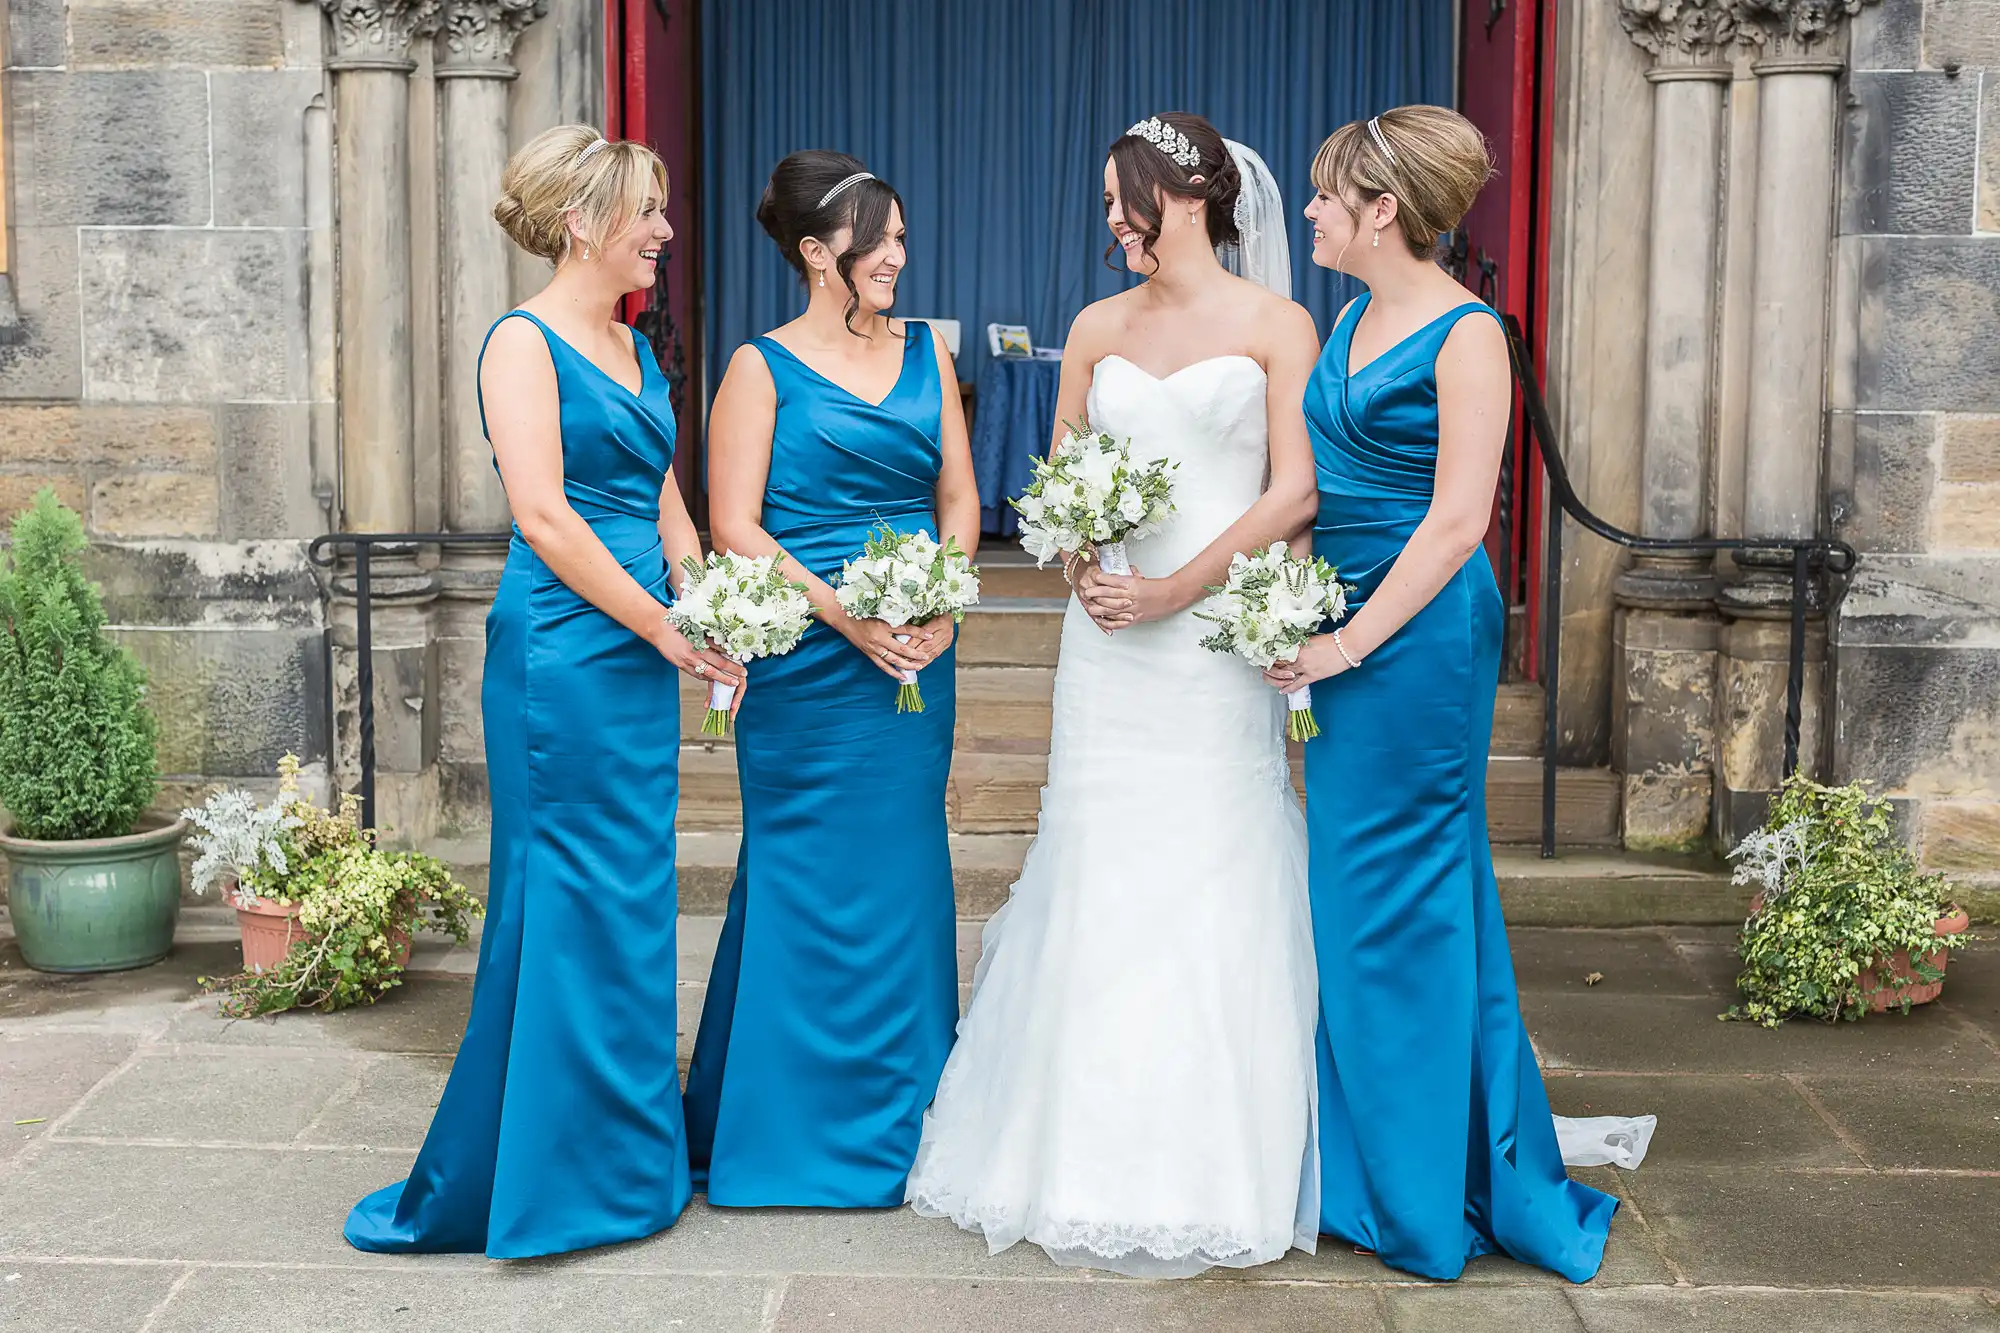 Four women in blue dresses, one in a white wedding gown, smiling and talking outside a church.